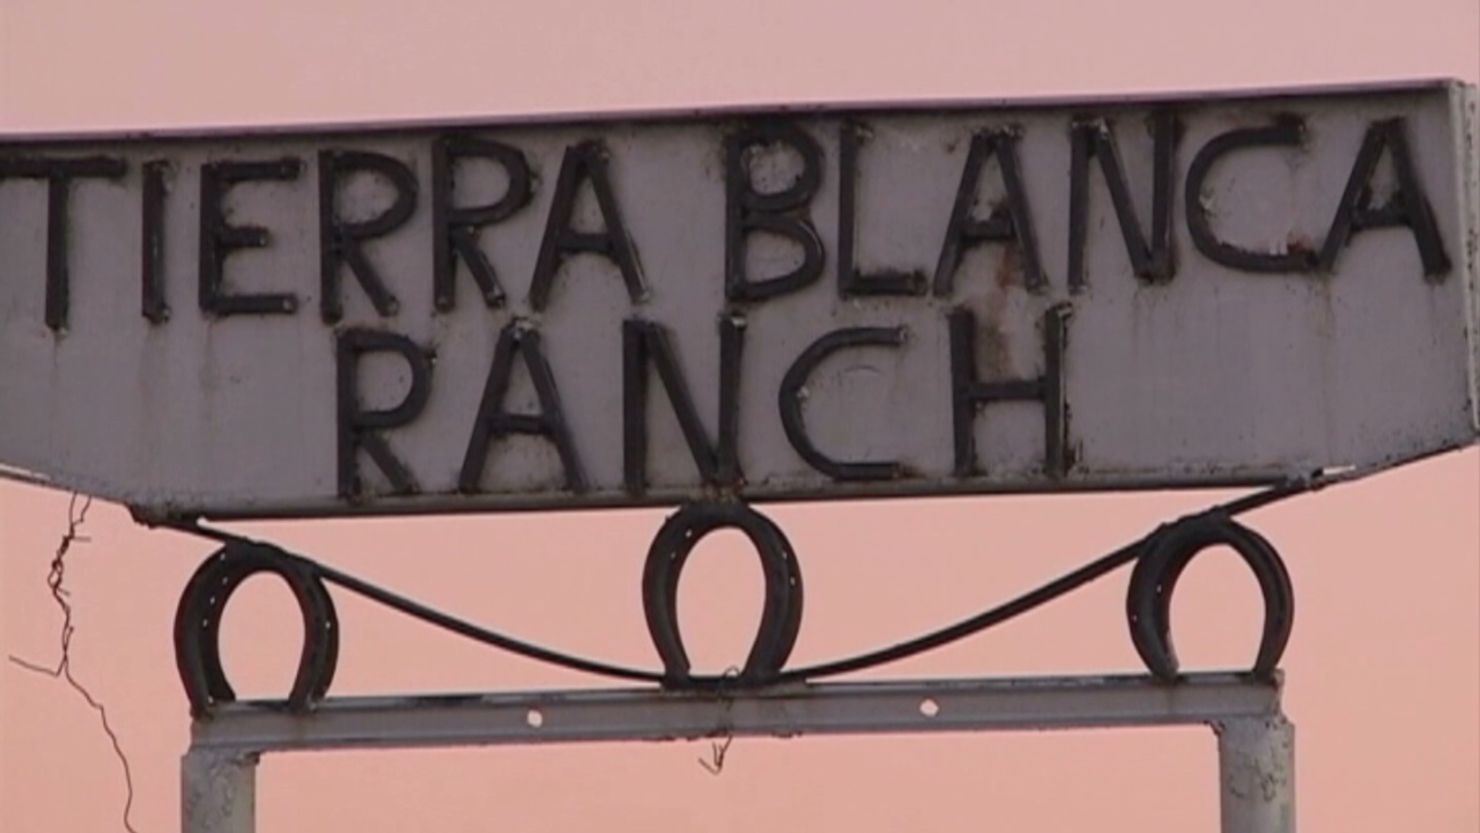 The Tierra Blanca Ranch is a facility for troubled youths. It's in southwestern New Mexico.